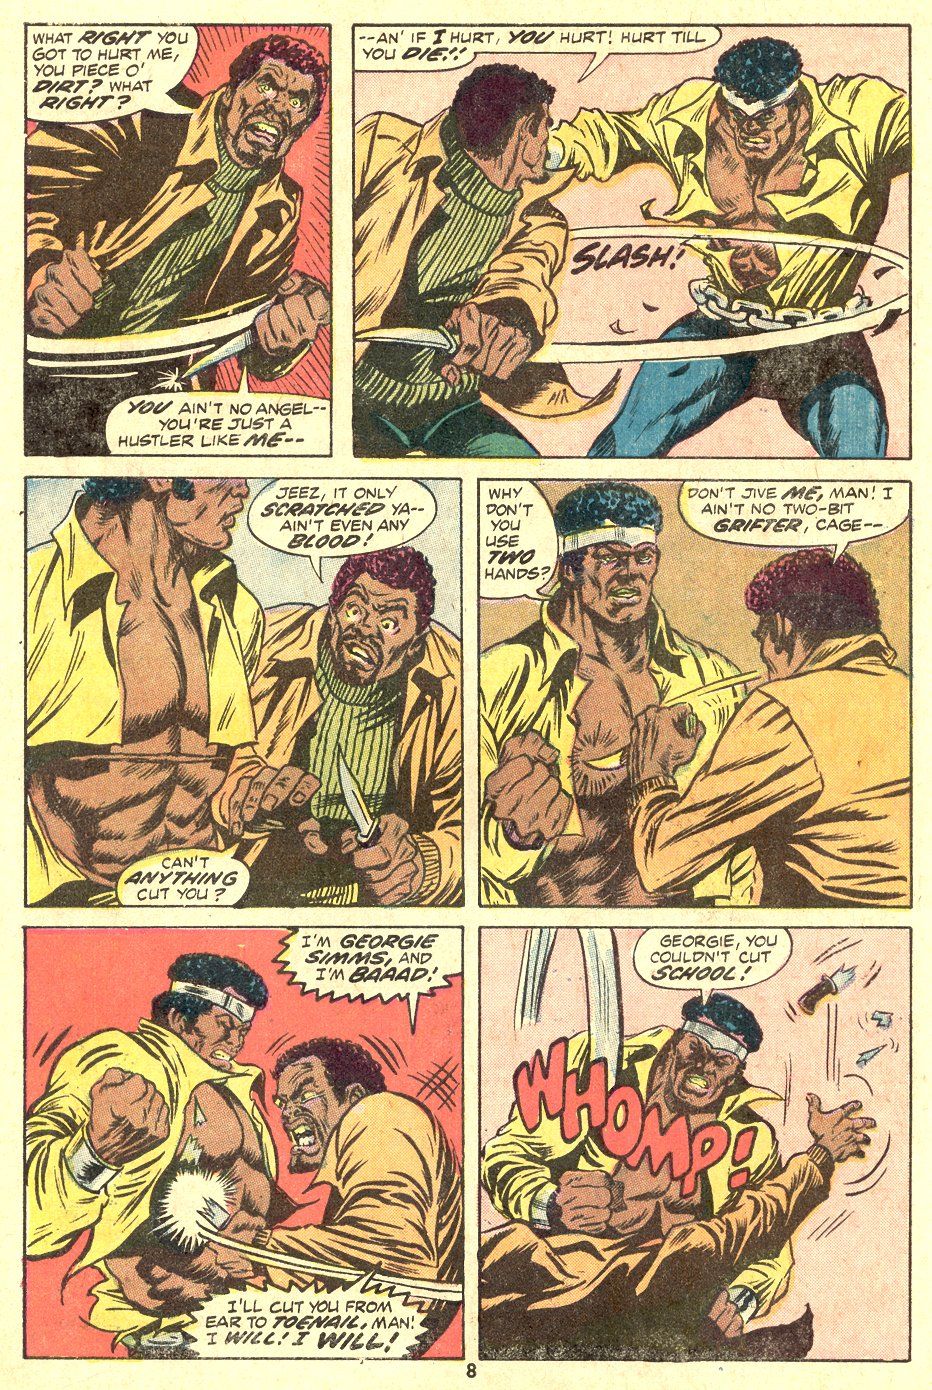 Luke Cage fights against a crook who tries to stab him